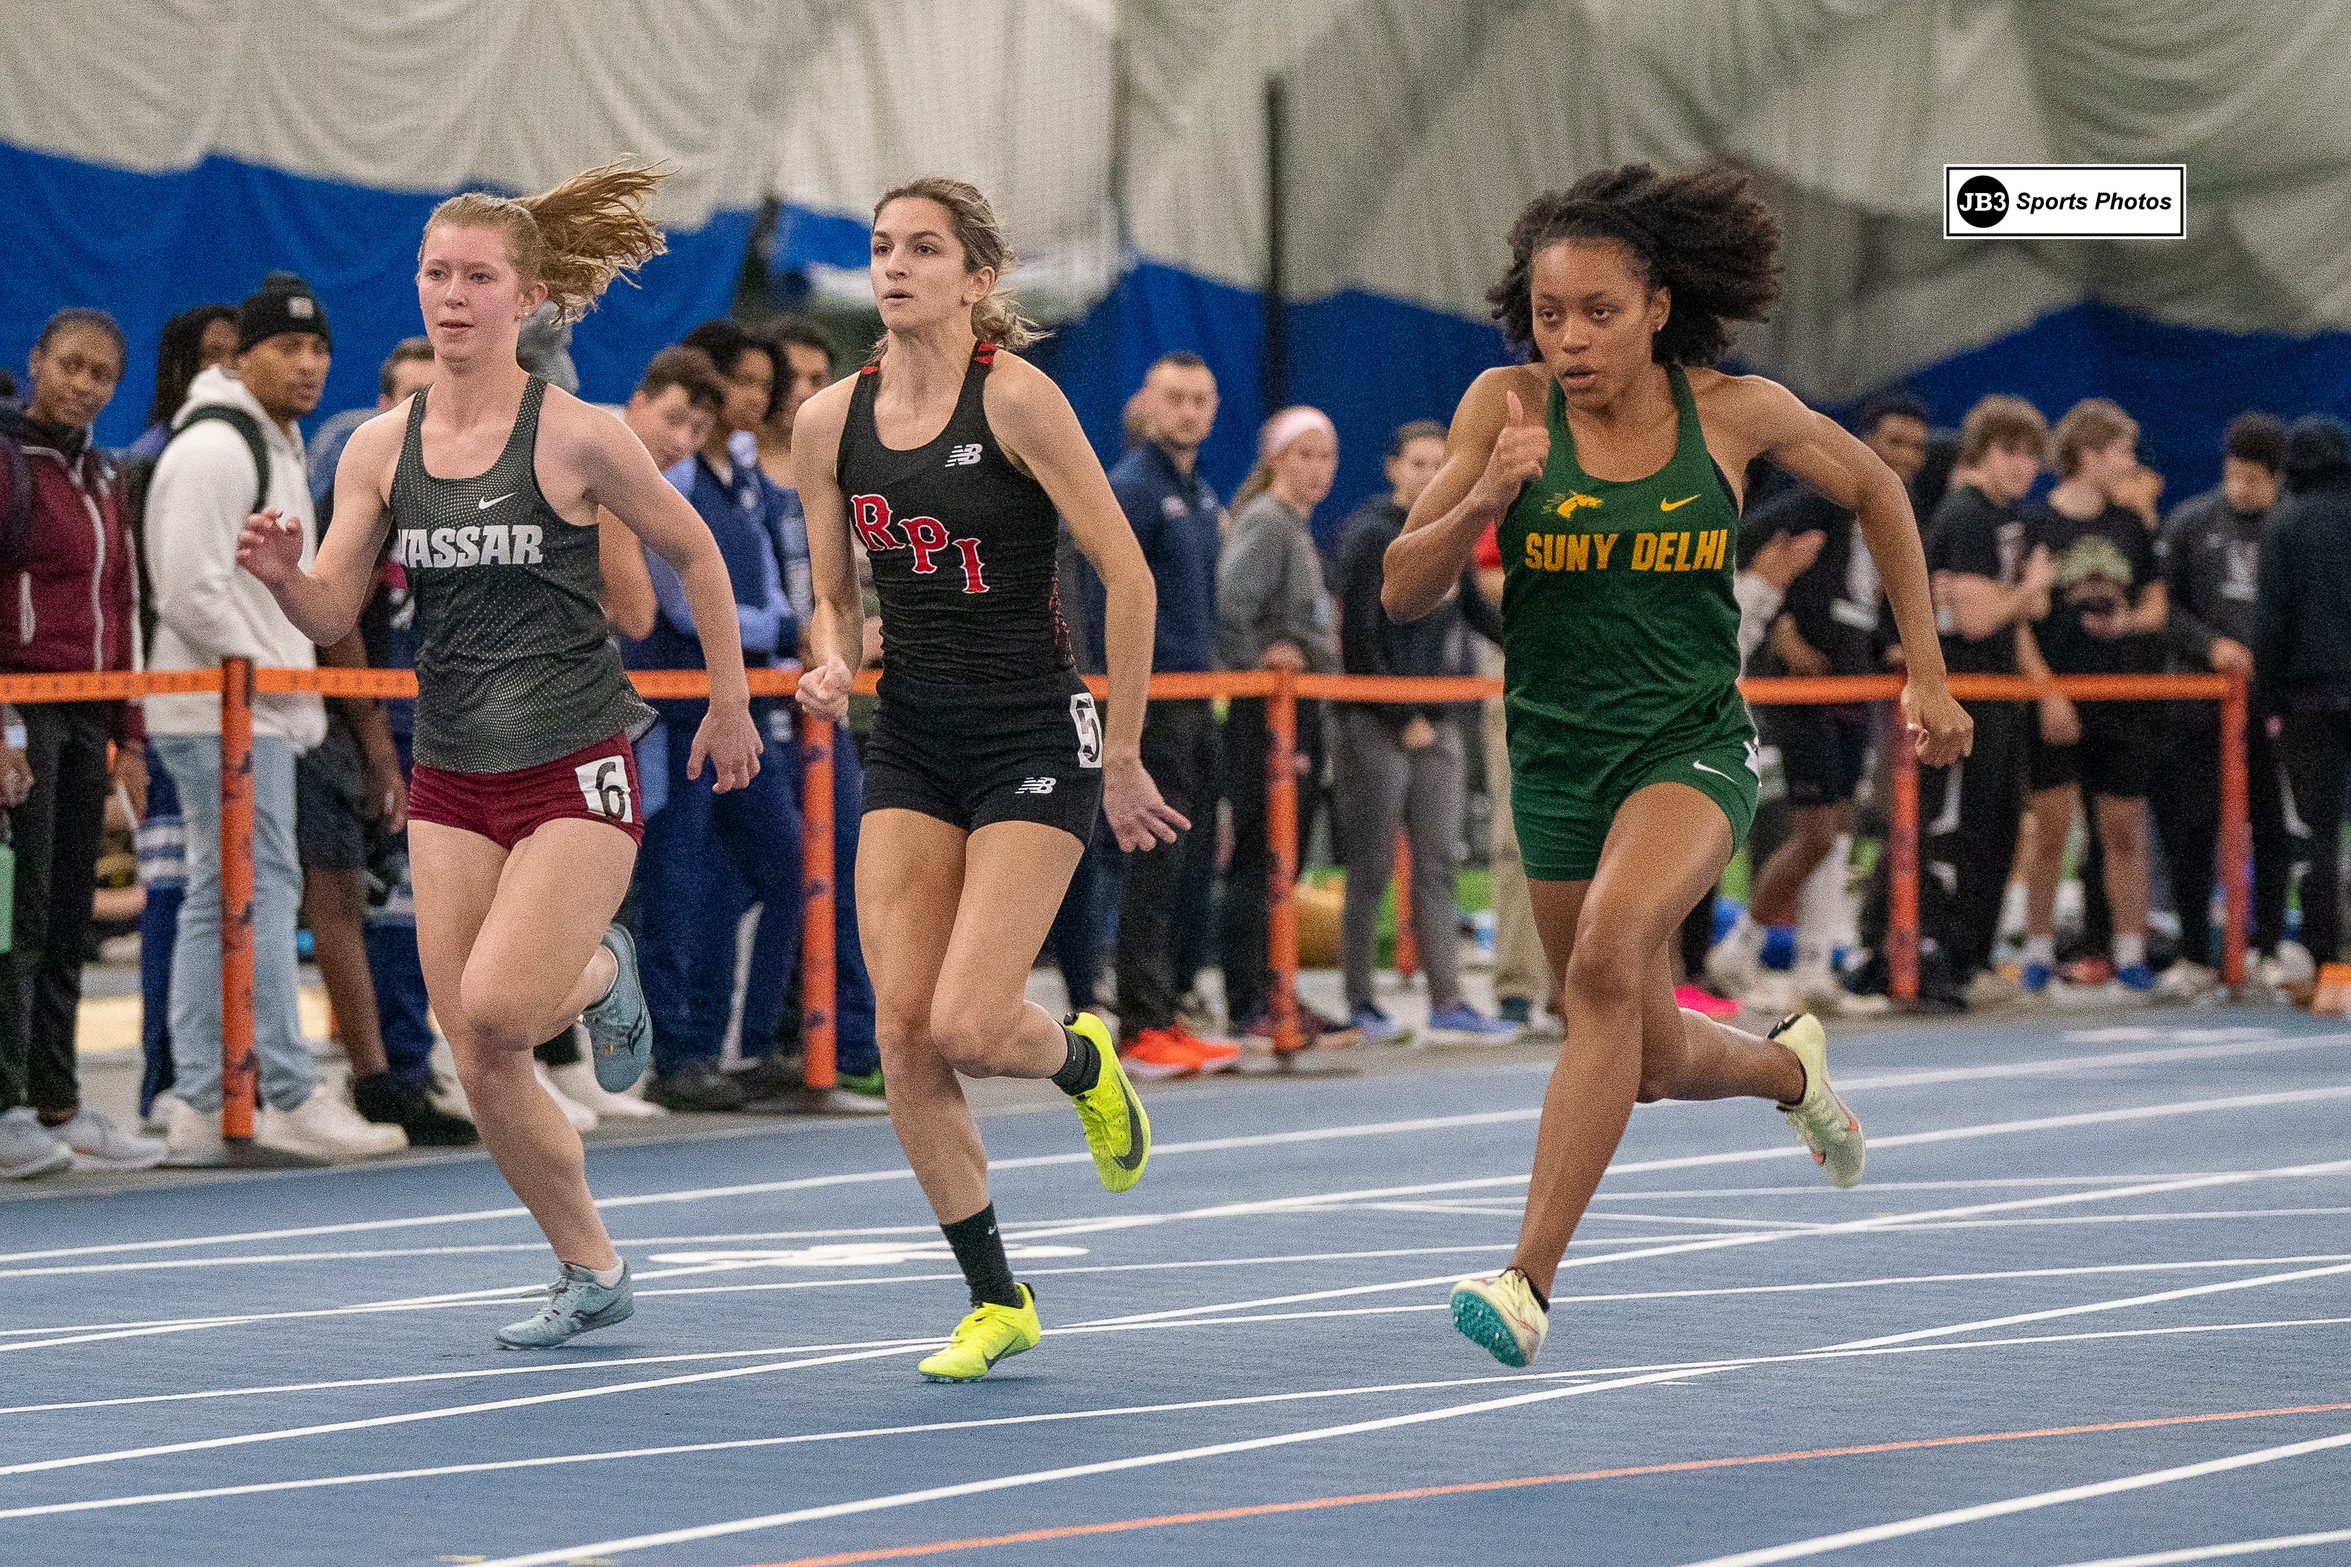 All-Time performances send Broncos towards Track and Field Championship season